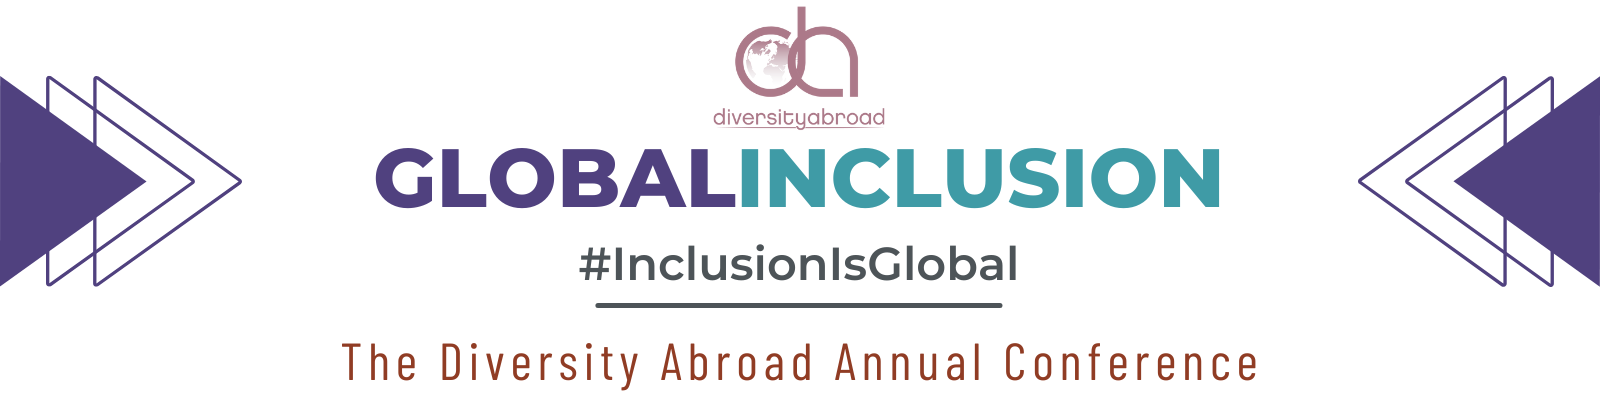 Global Inclusion ConferenceThe Diversity Abroad Annual Conference, #InclusionisGlobal